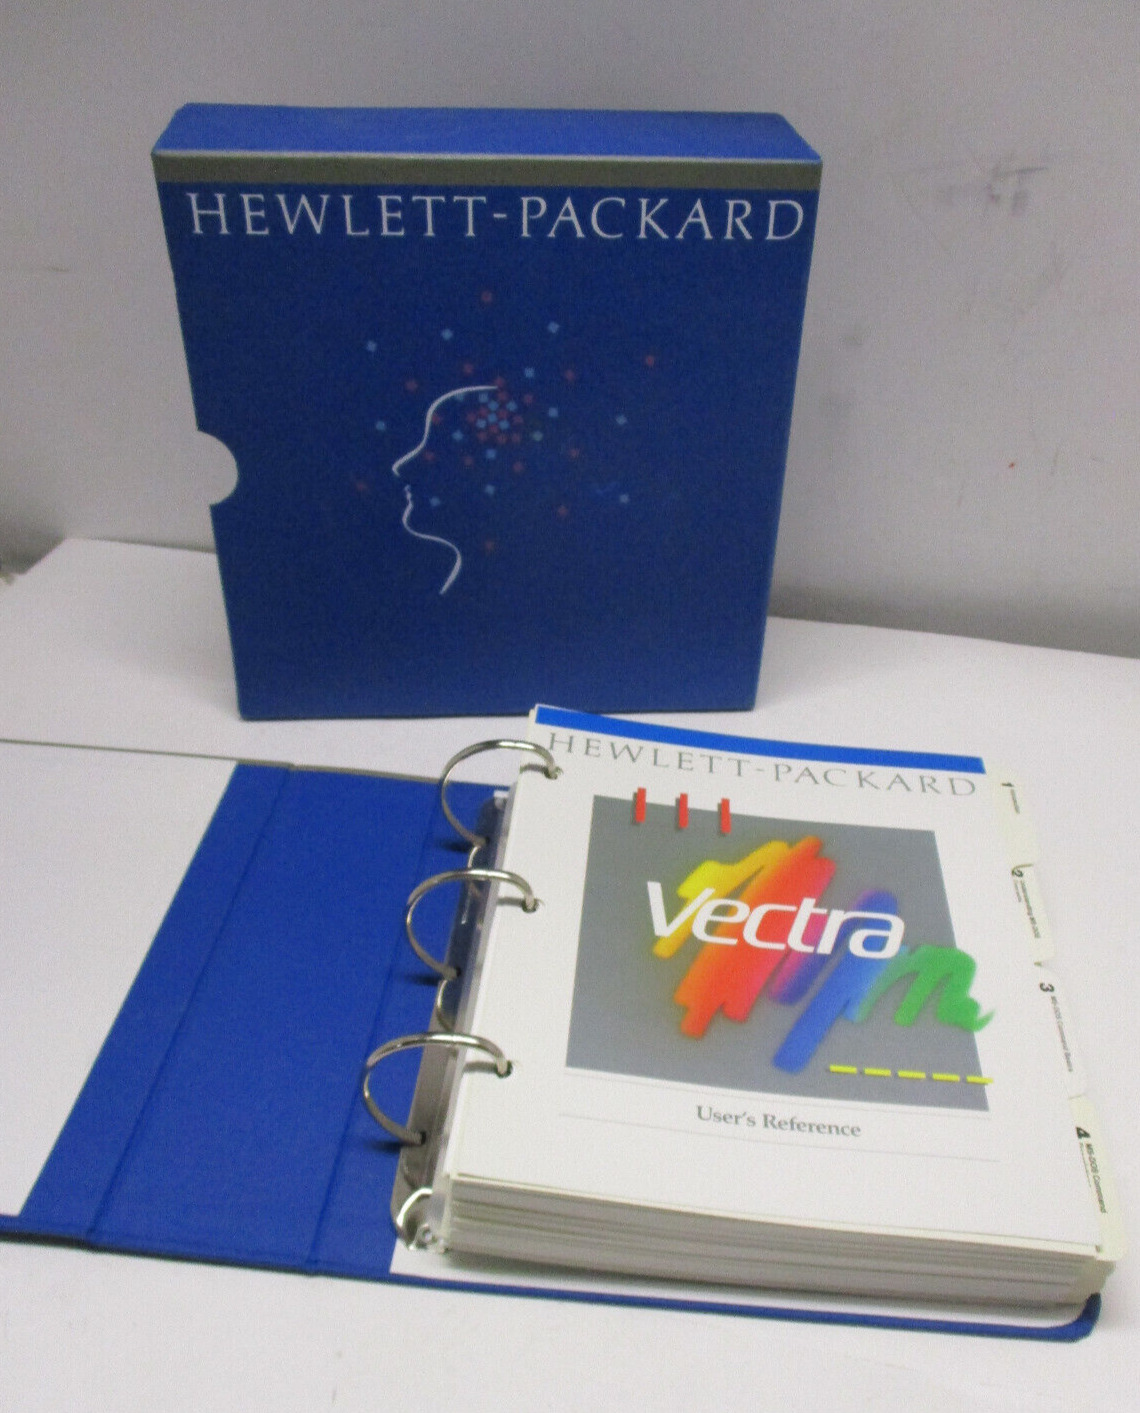 Vintage Hewlett Packard Microsoft MS-DOS 3.3 User Reference Book 1988 HP Vectra